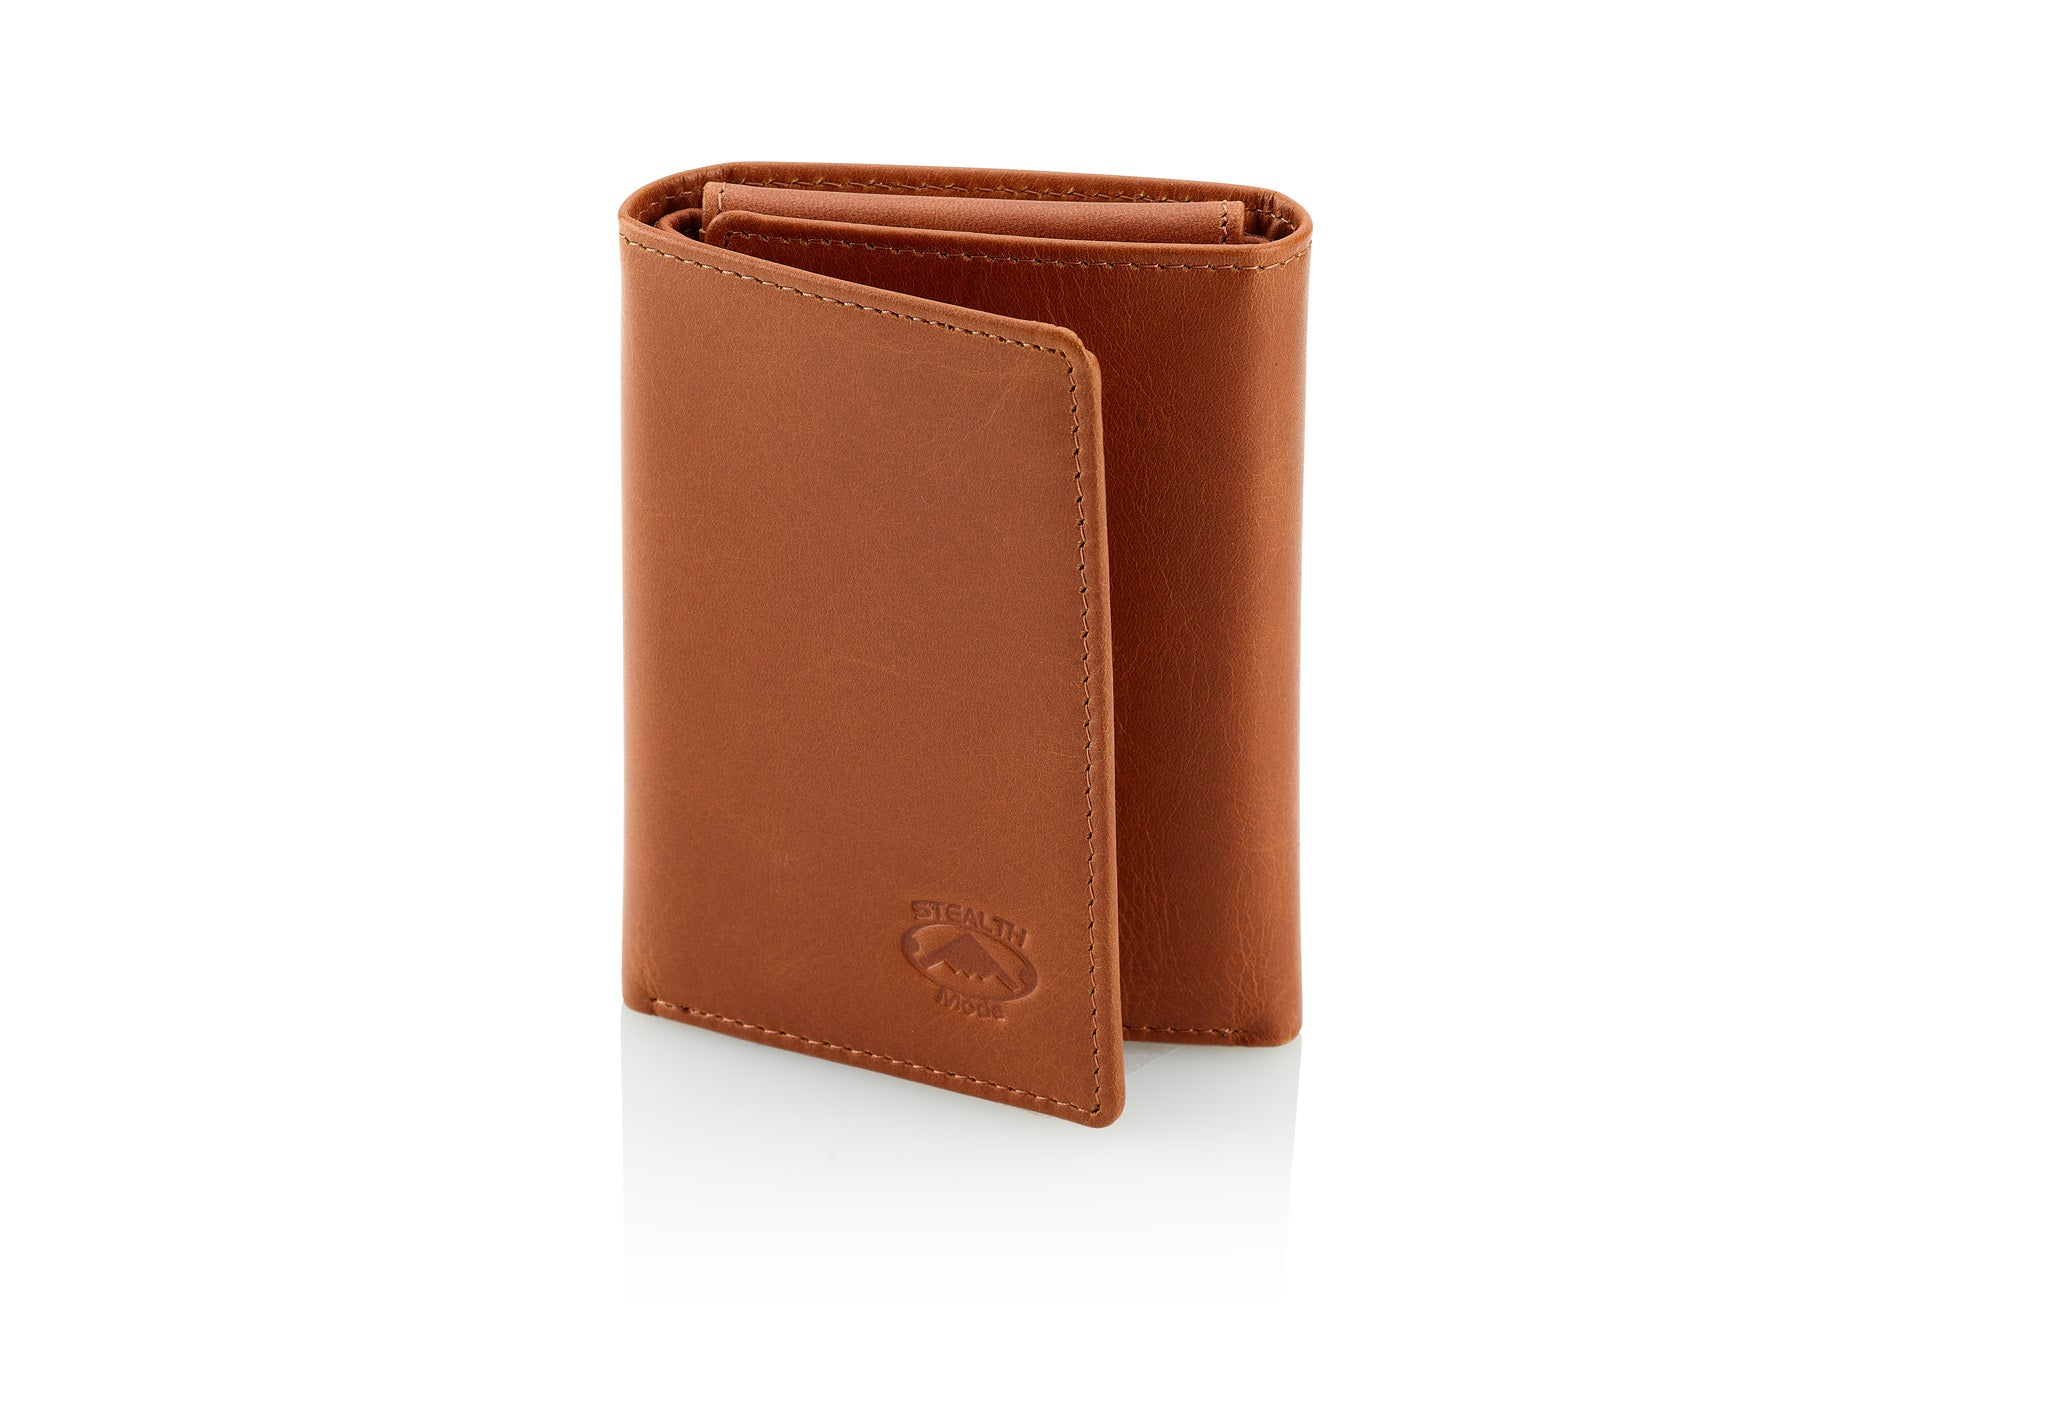 Trifold Leather Wallet for Men with ID Holder and RFID Blocking (Light Brown)